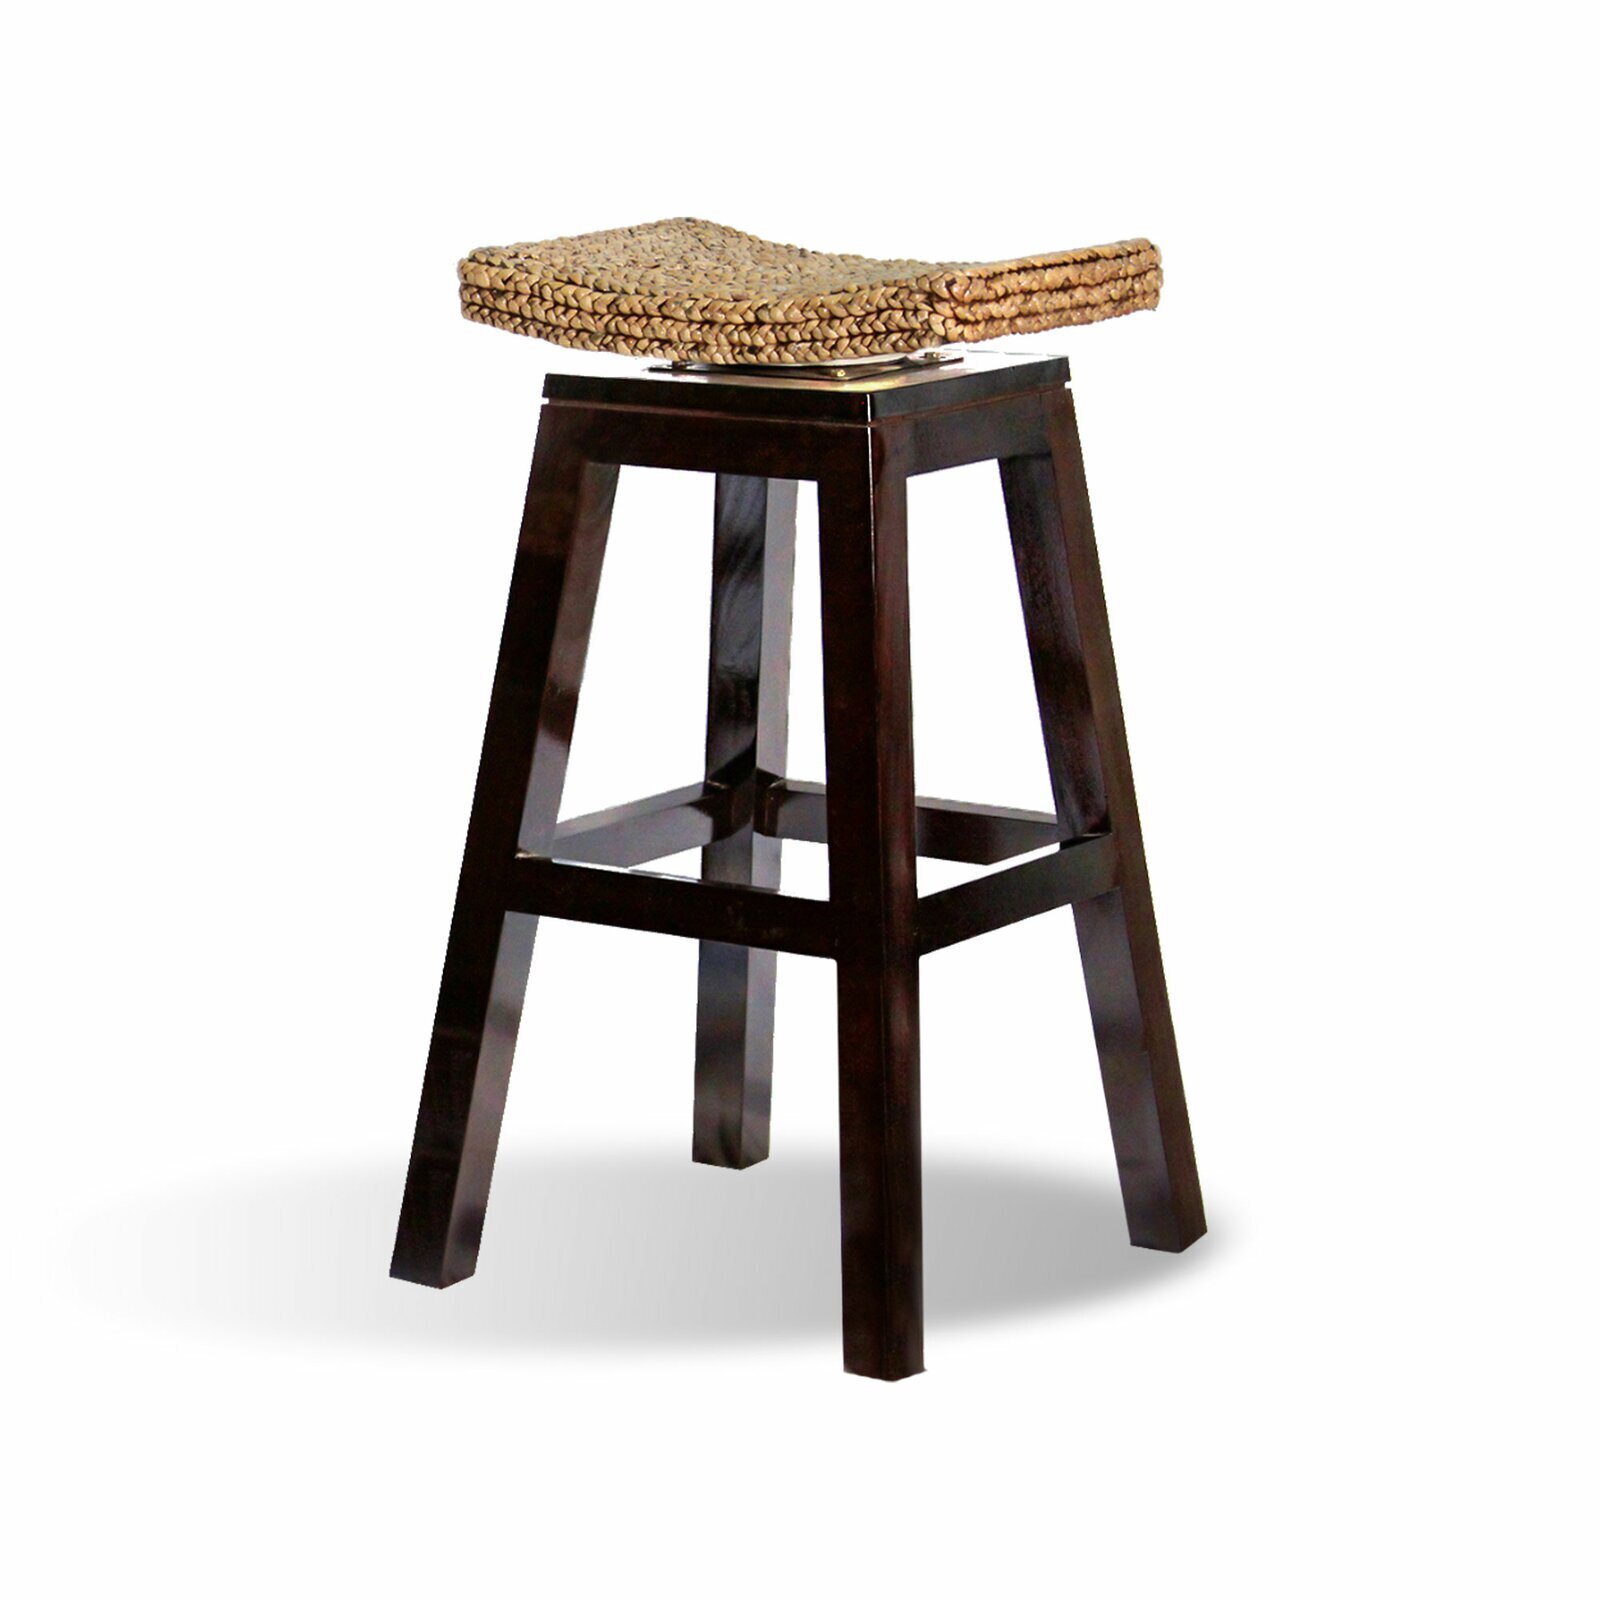 Wooden Bar Stool With Saddle Seat